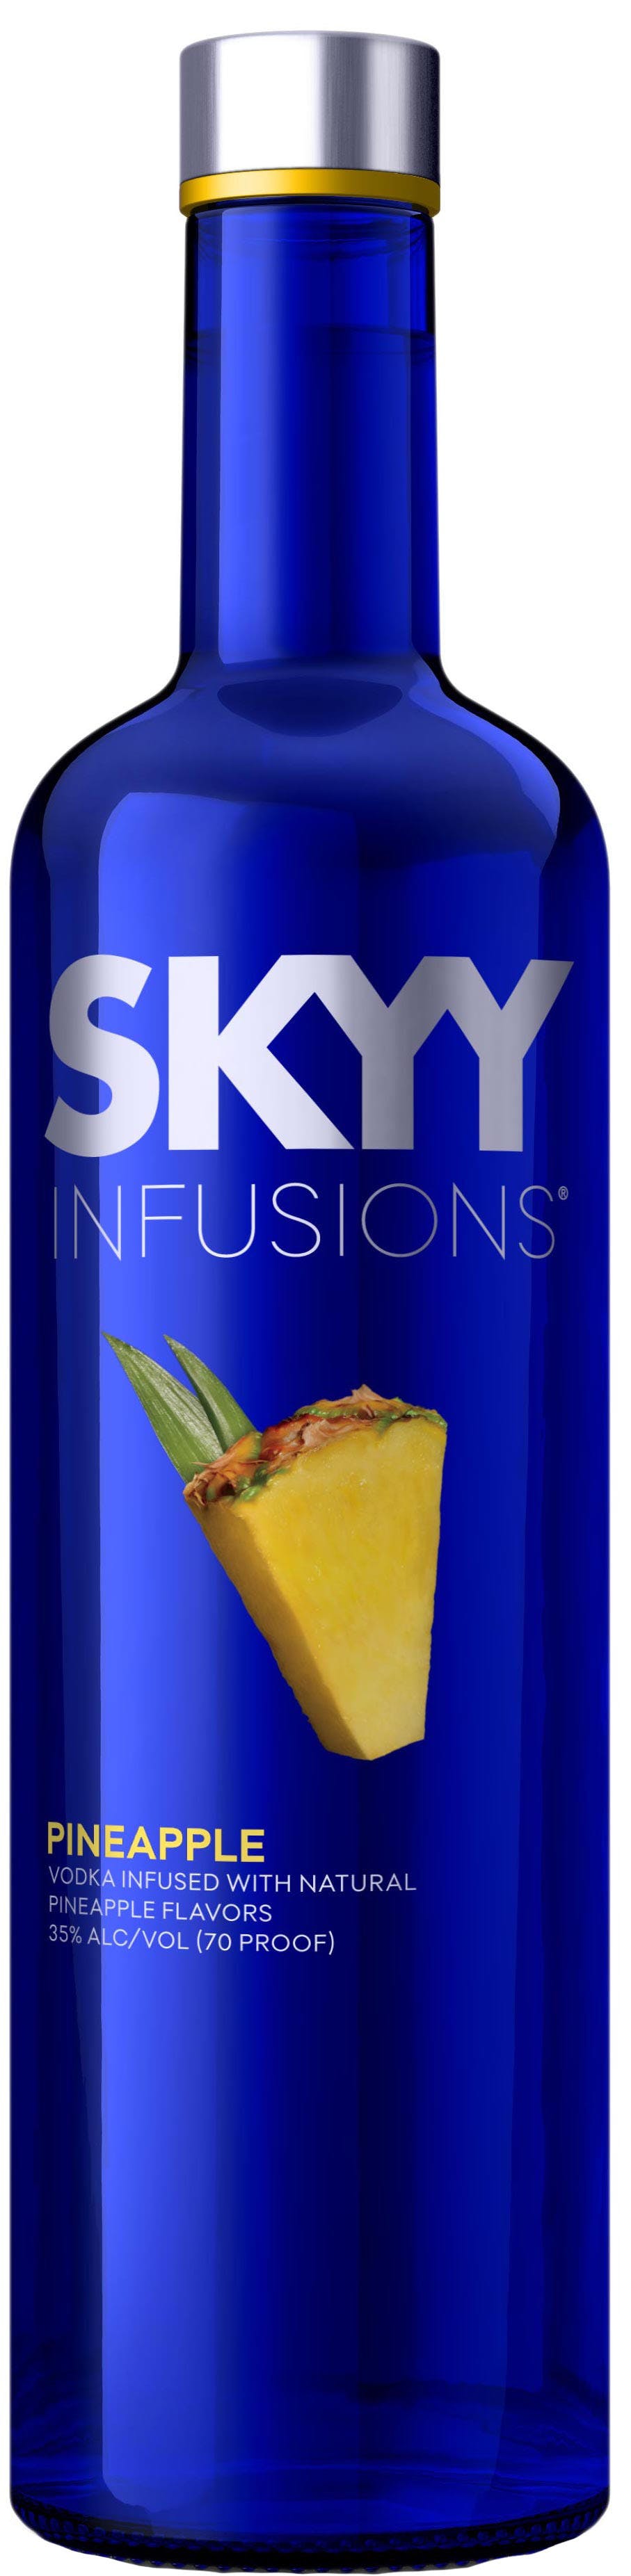 Skyy Infusions Pineapple Vodka 1 75l